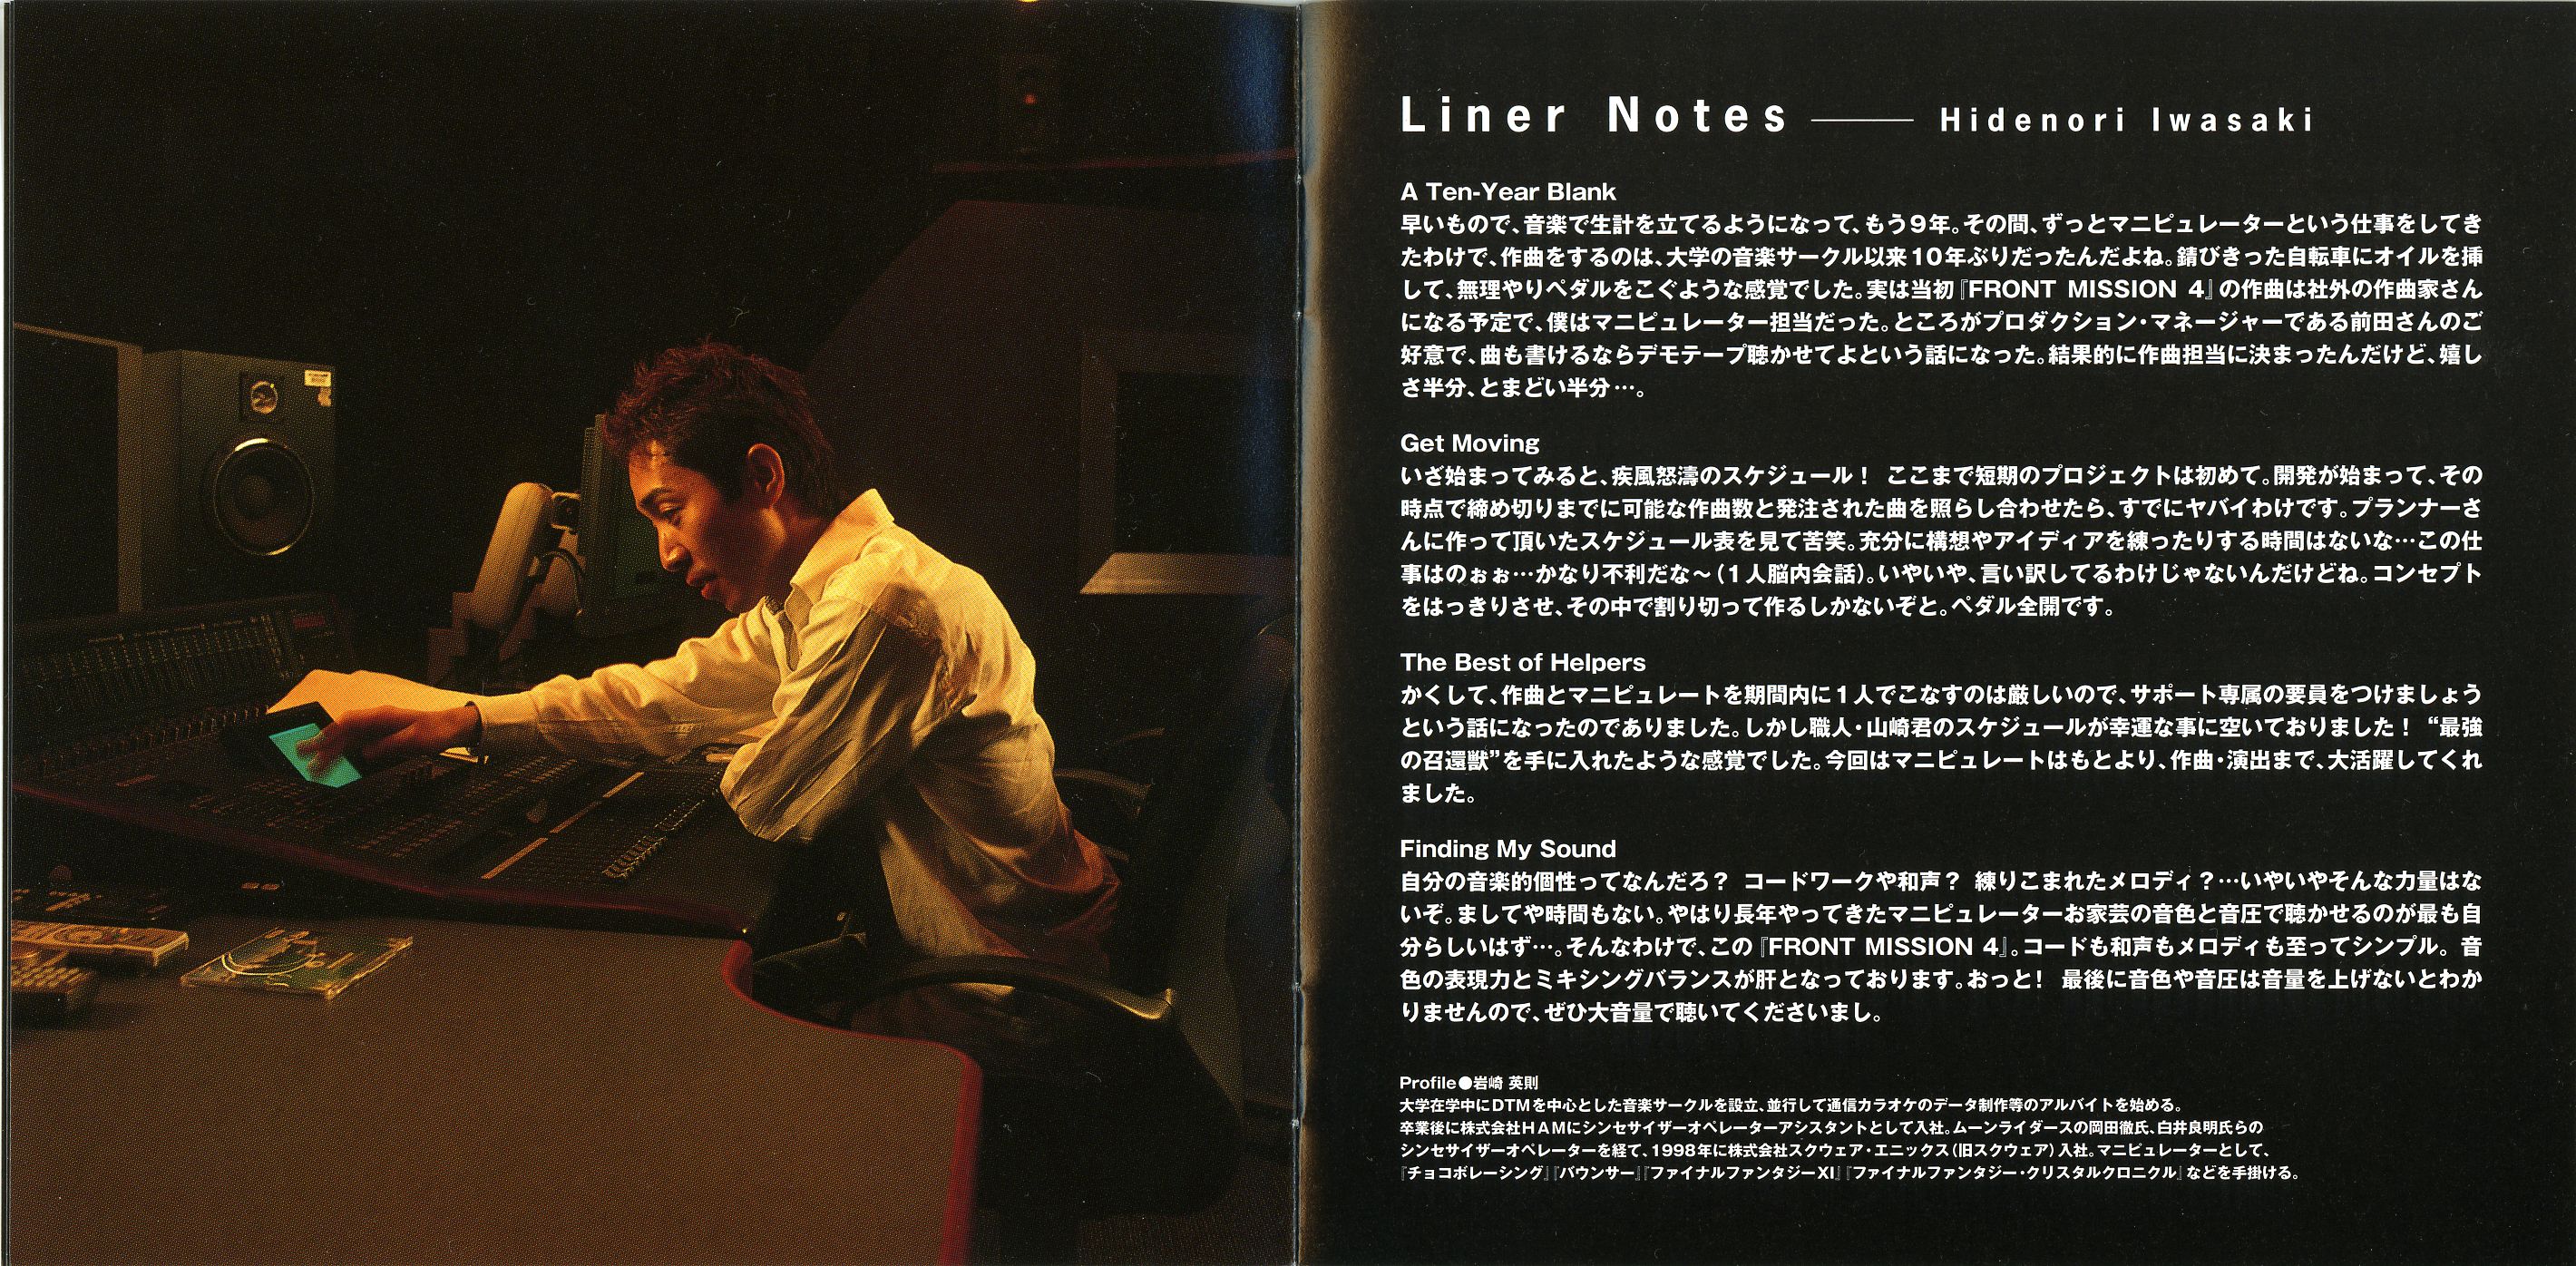 FM4 cover - 1+4 #05 booklet